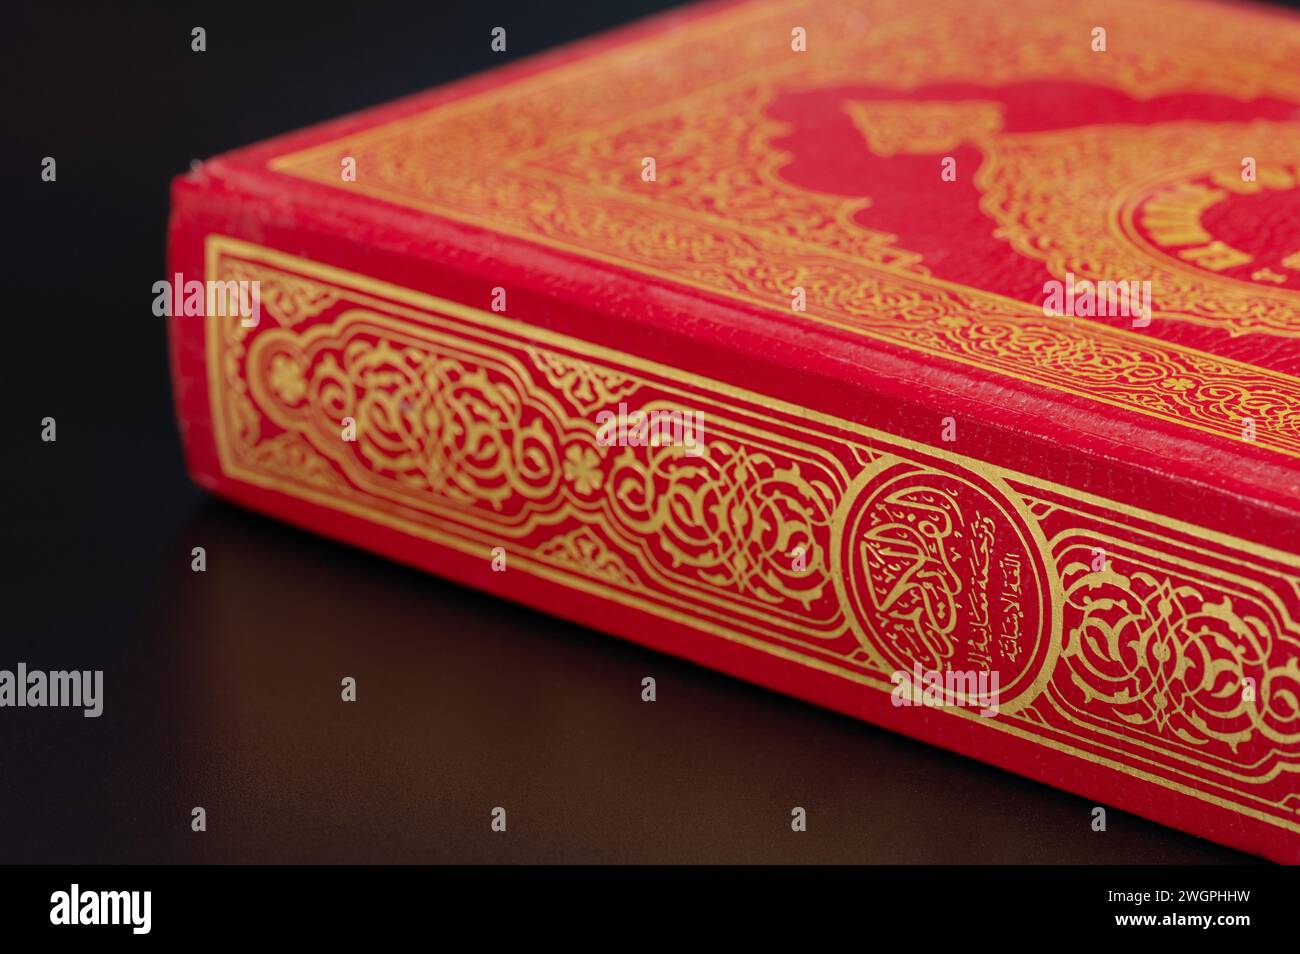 Koran book with red hard cover macro close up view Stock Photo